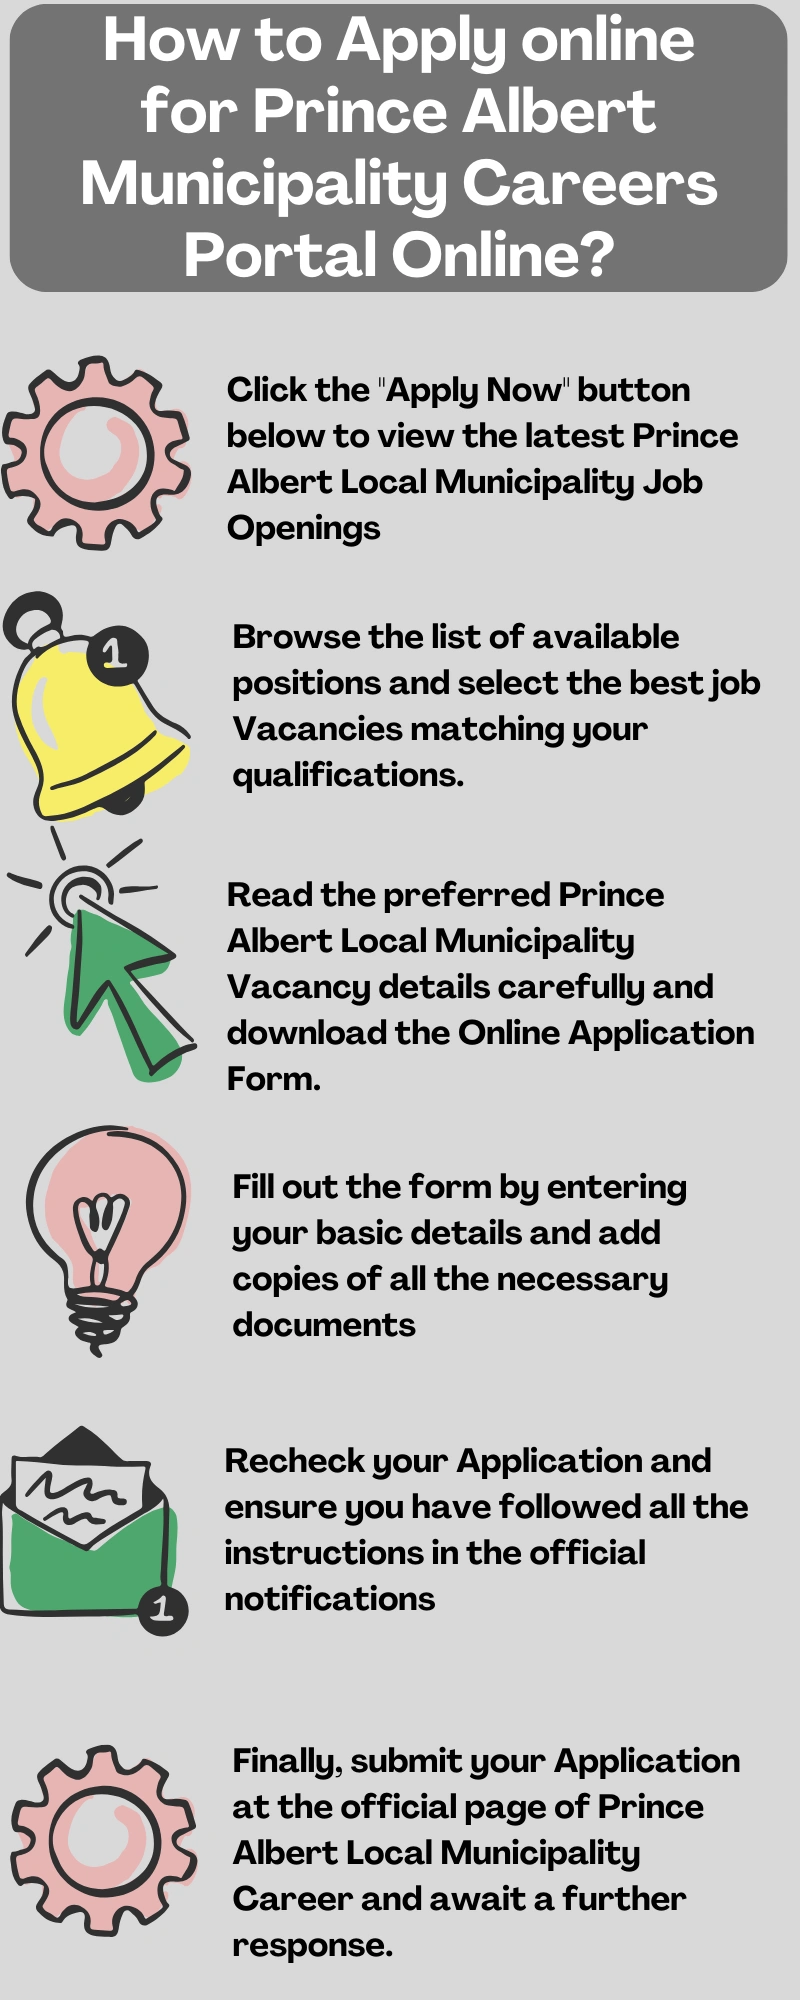 How to Apply online for Prince Albert Municipality Careers Portal Online?